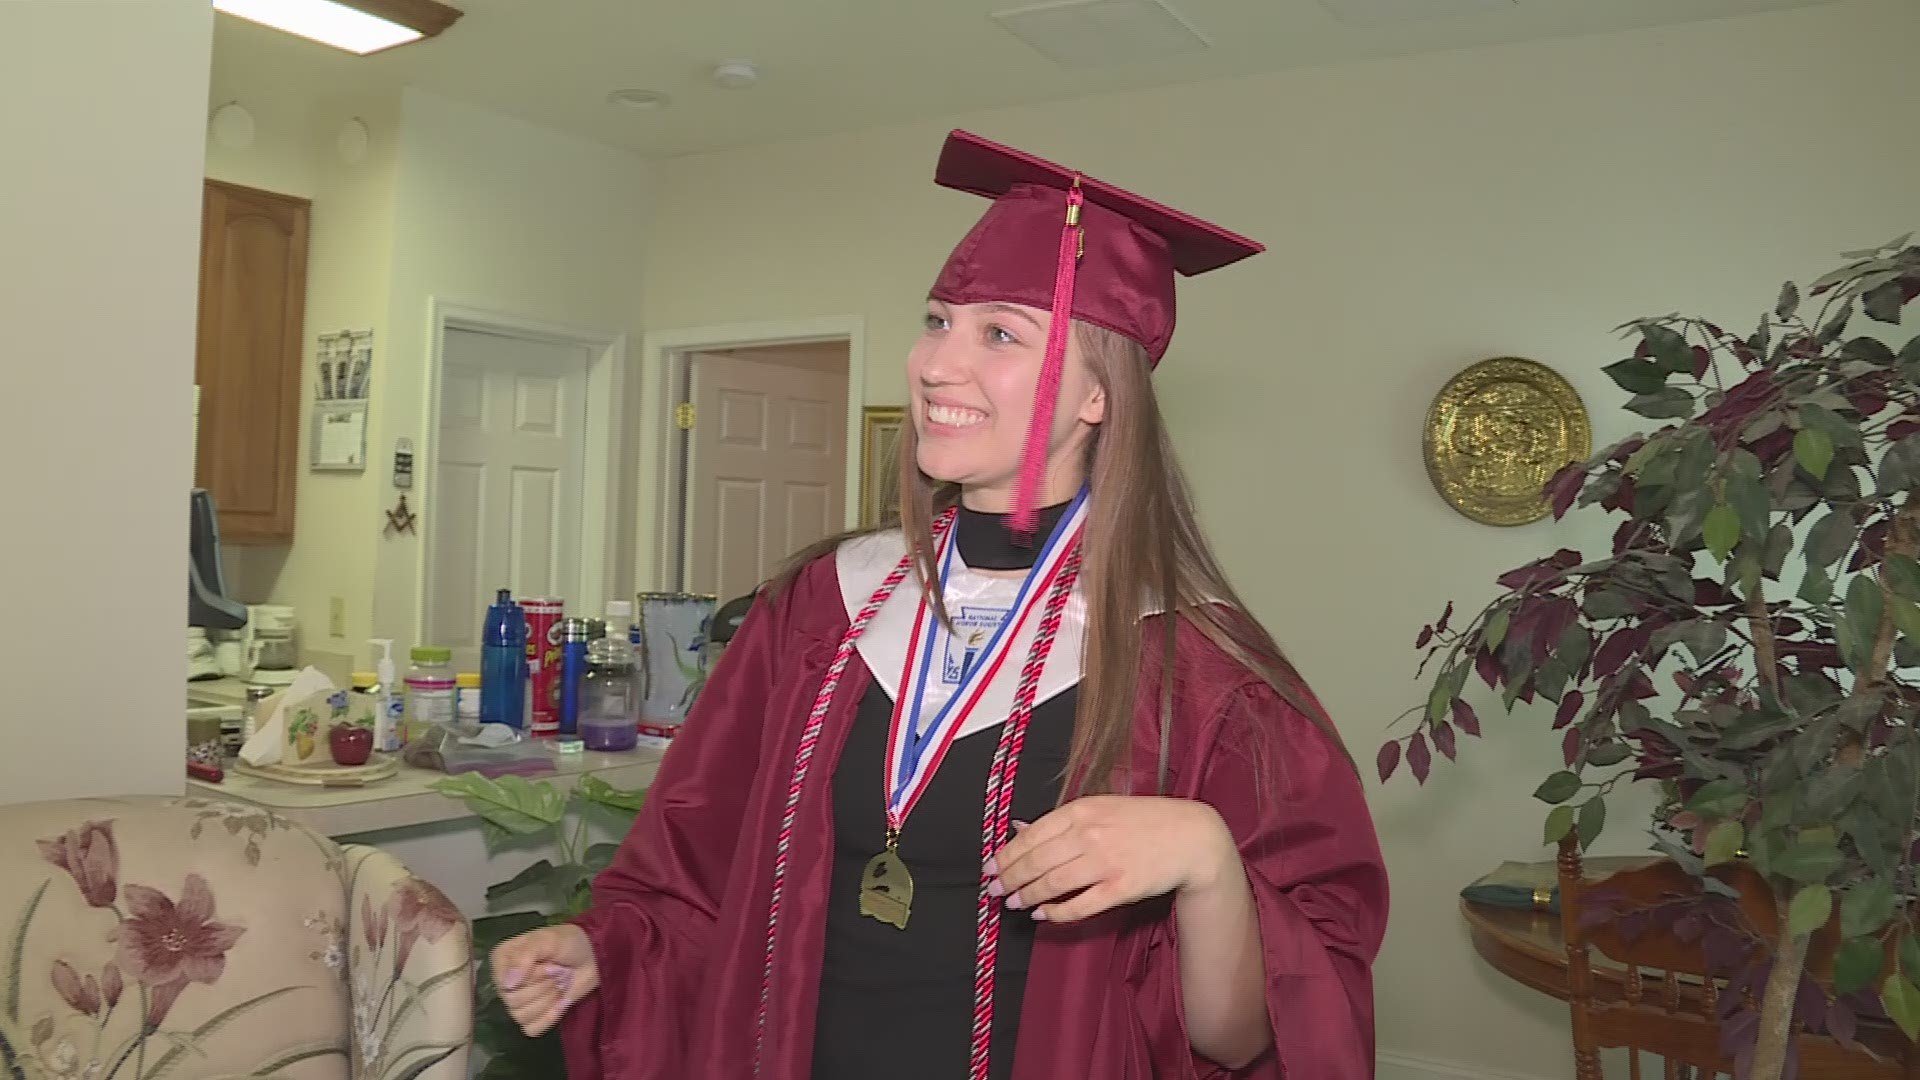 Doctors gave Jerry Hynes 12 months to live. He blew that prediction and will now see his daughter graduate from high school.